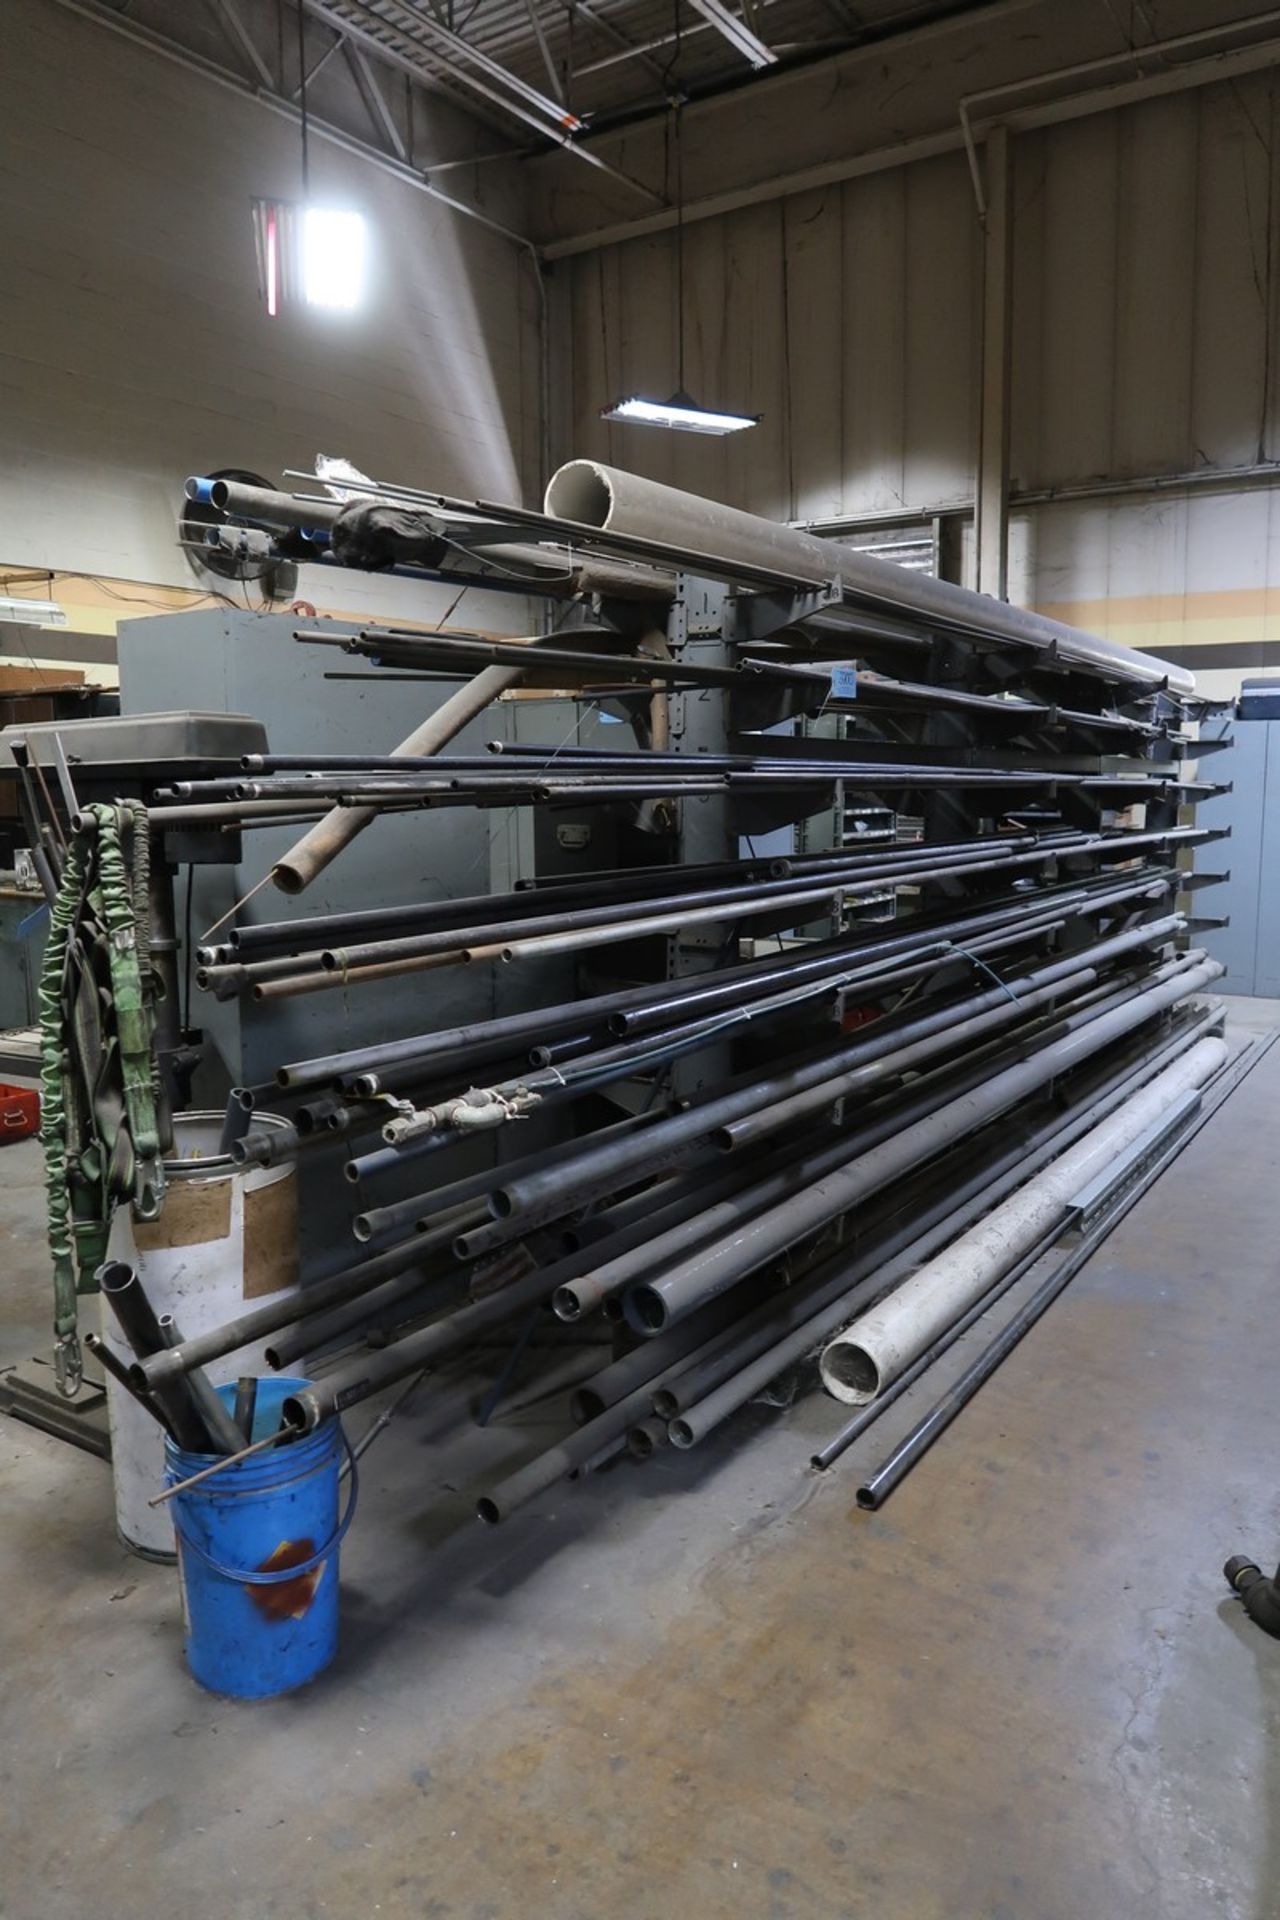 8-Tier Double-Sided Cantilever Rack with Contents of Threaded Pipe & Conduit